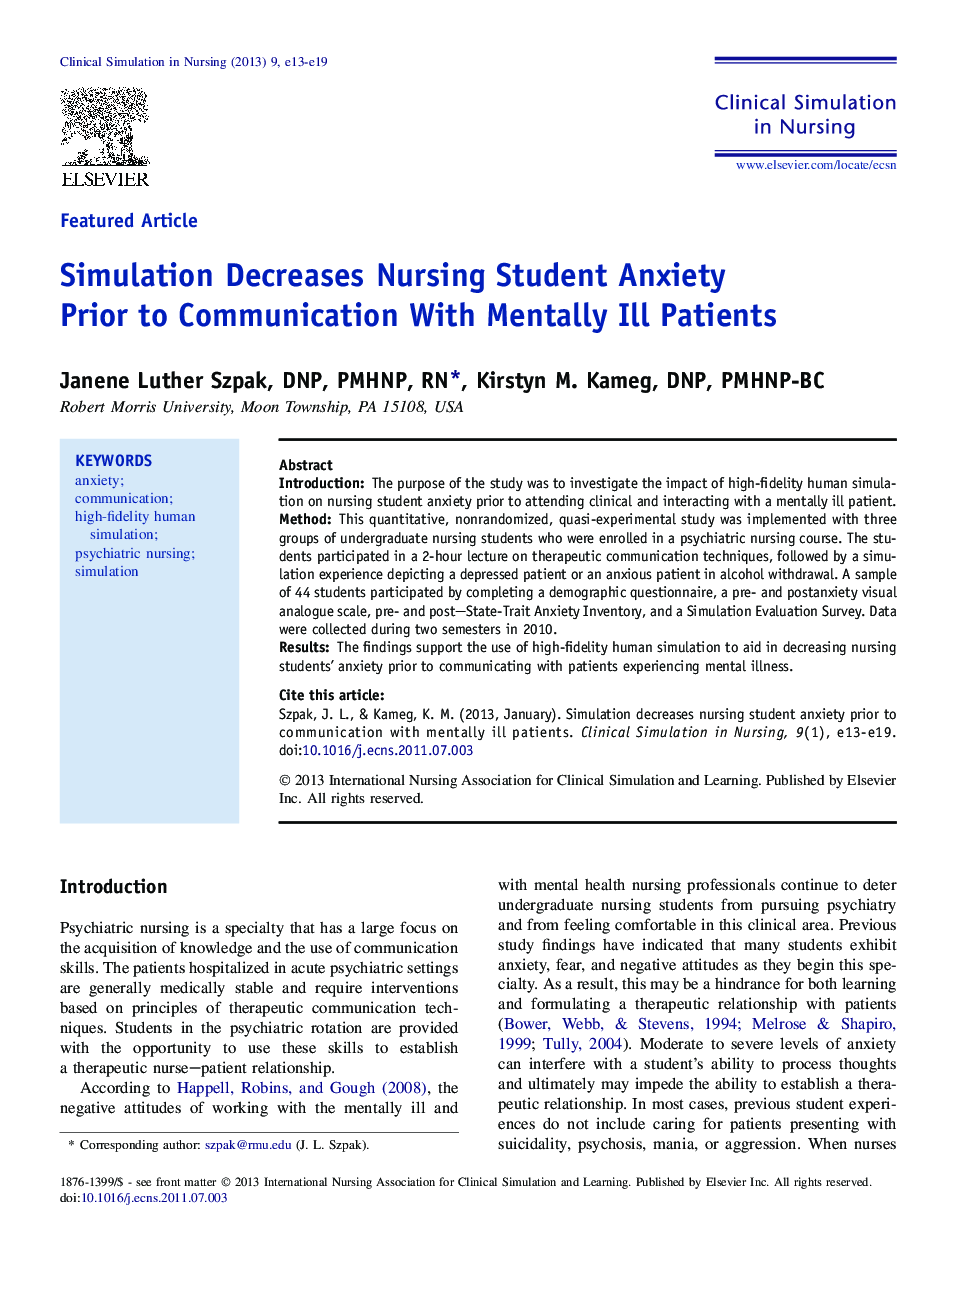 Simulation Decreases Nursing Student Anxiety Prior to Communication With Mentally Ill Patients